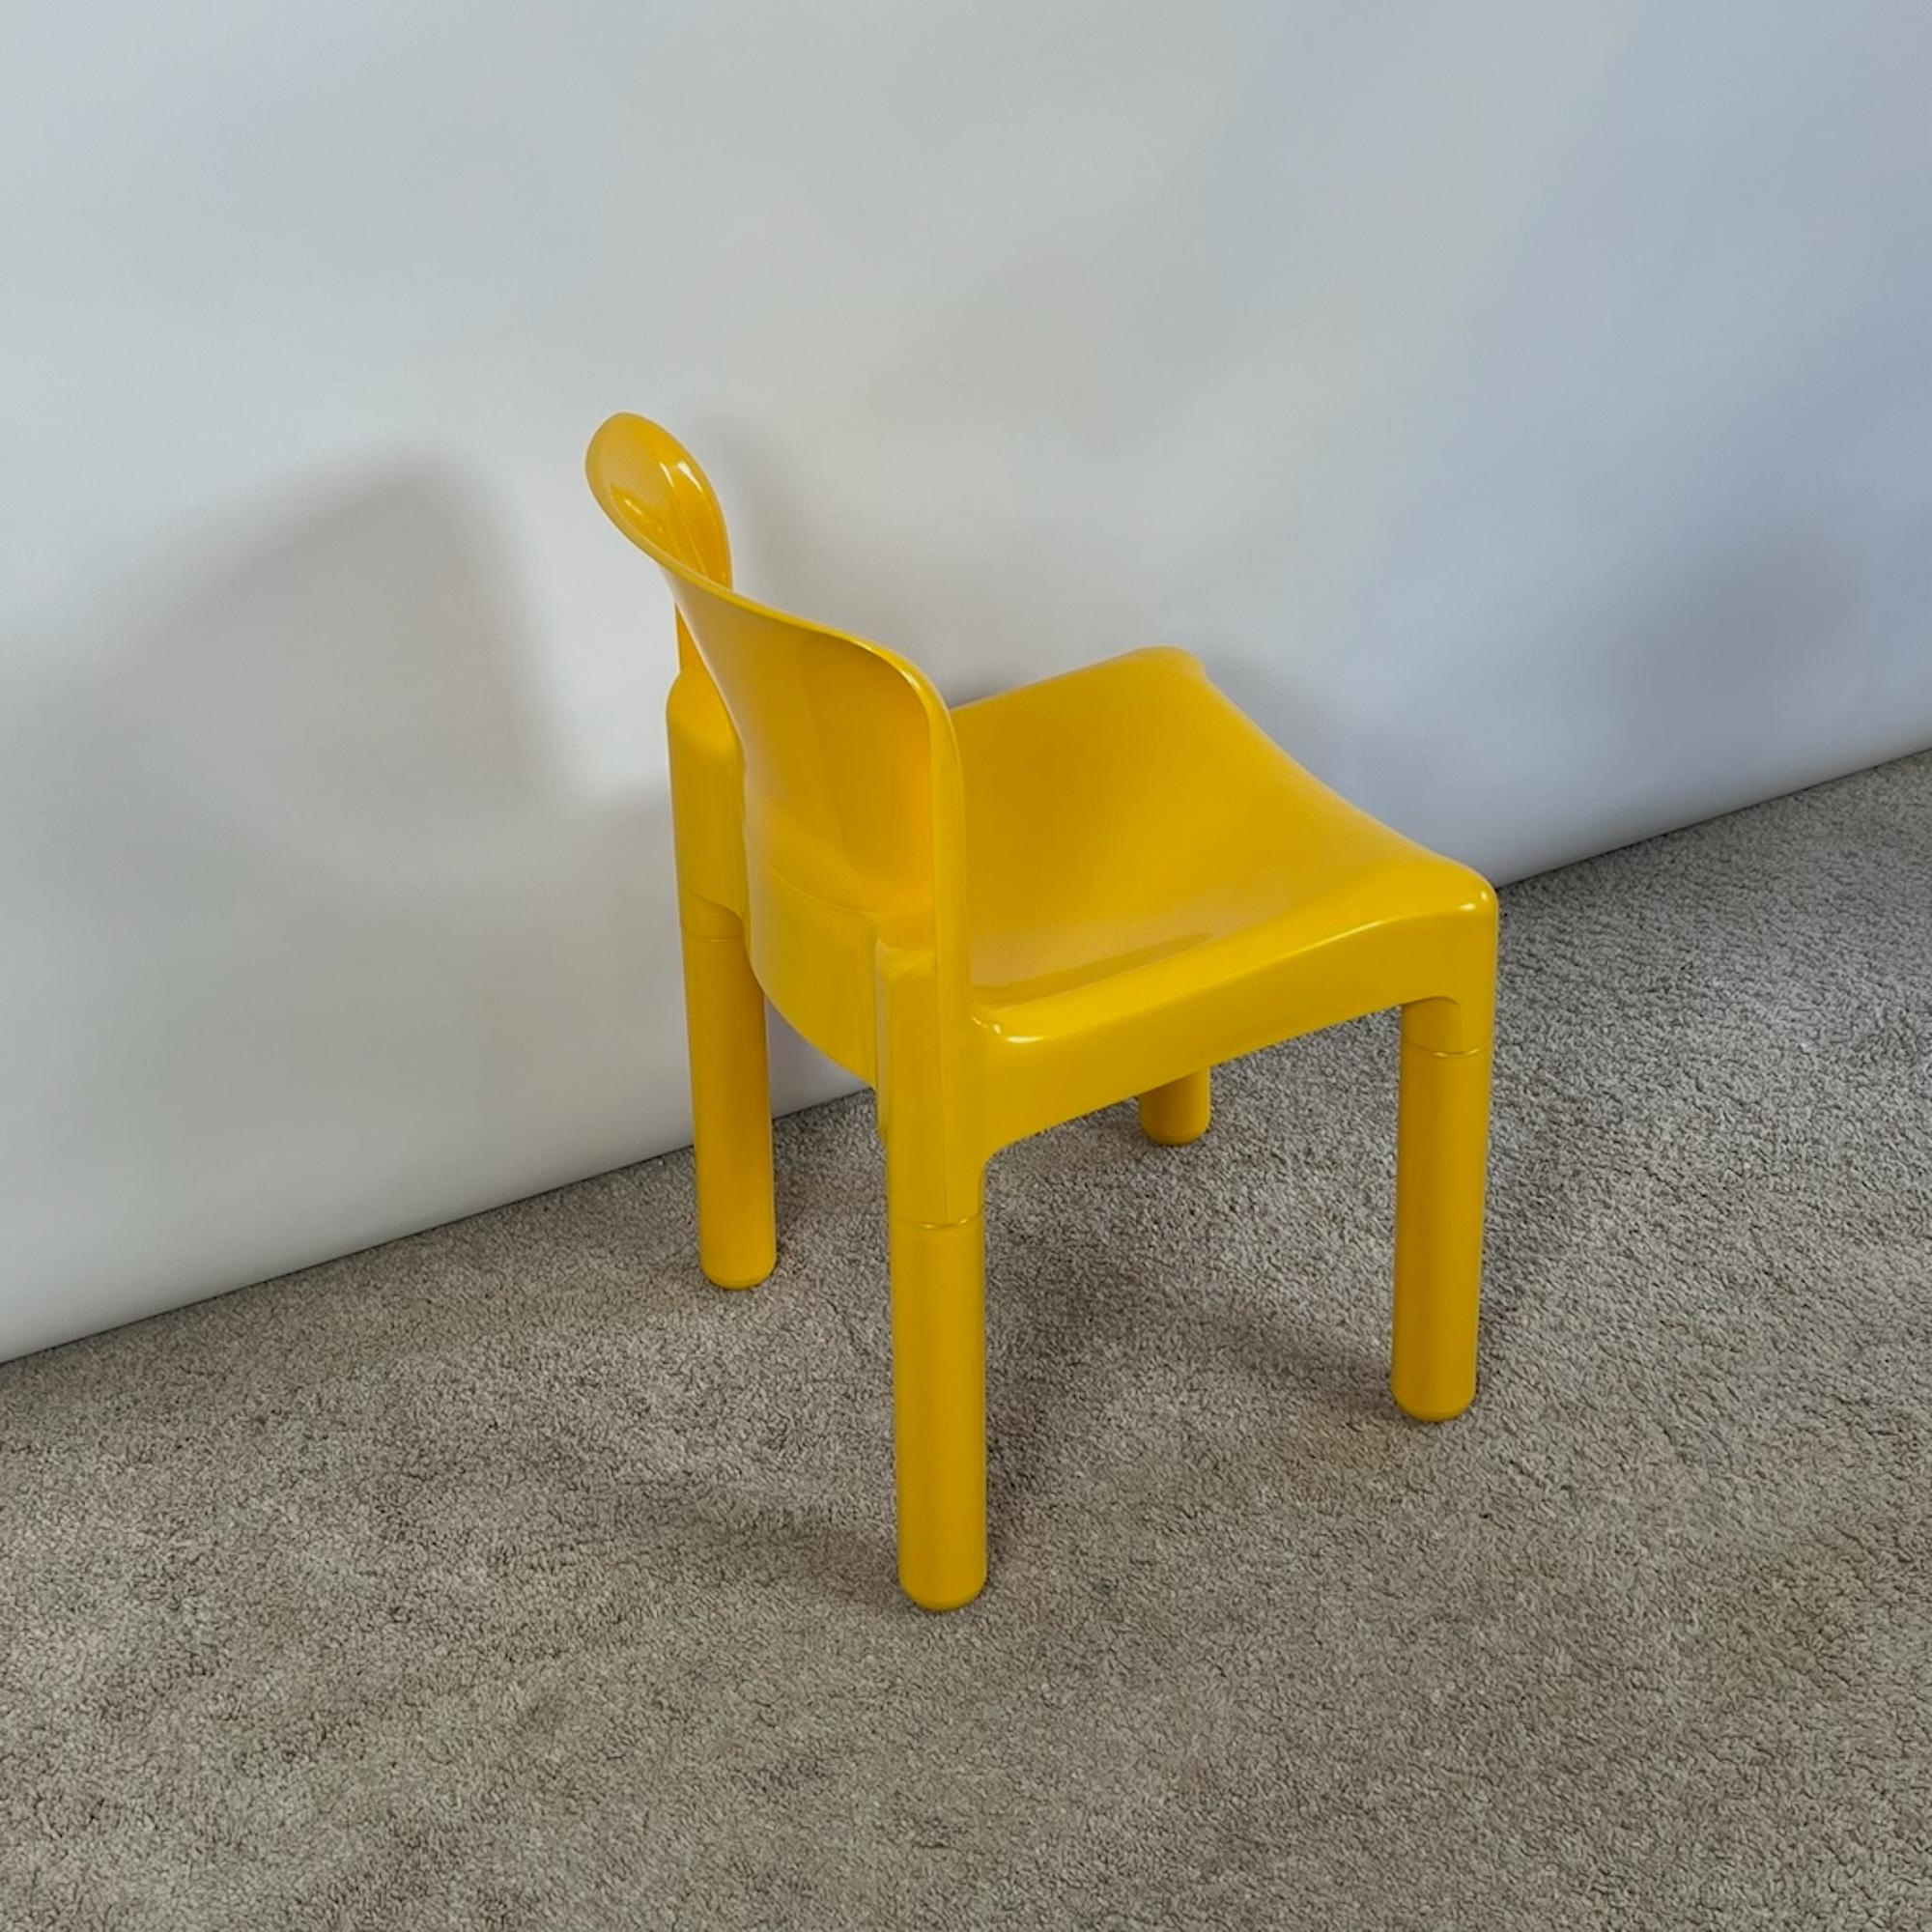 Industrial Kartel Model 4875 Chair in Glossy Yellow by Carlo Bartoli, 1980s New Old Stock